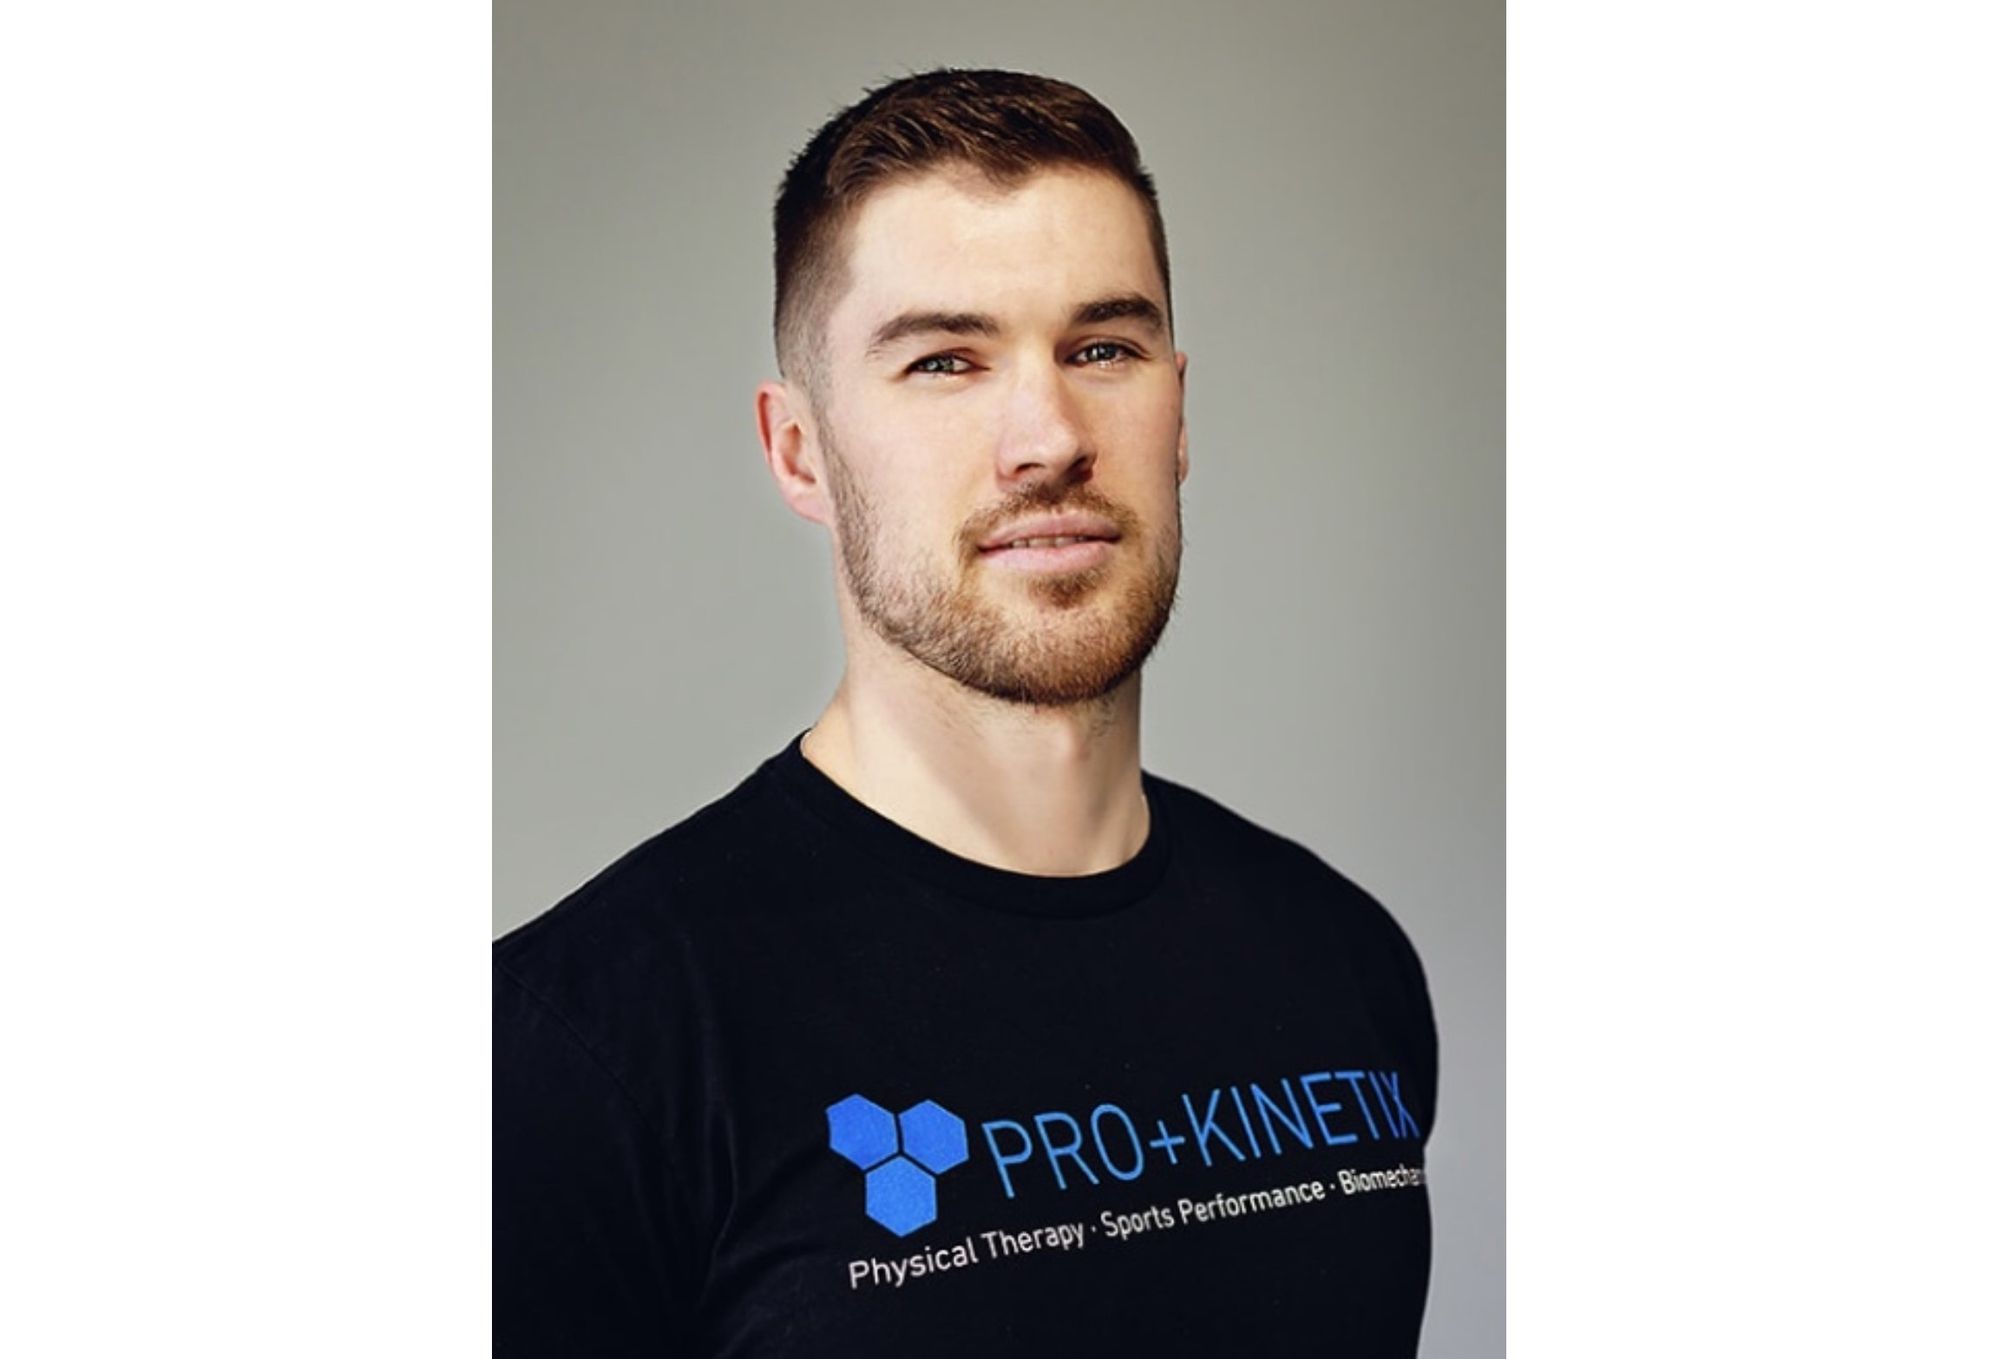 Pro+Kinetix Physical Therapy & Performance - Ben Bagge